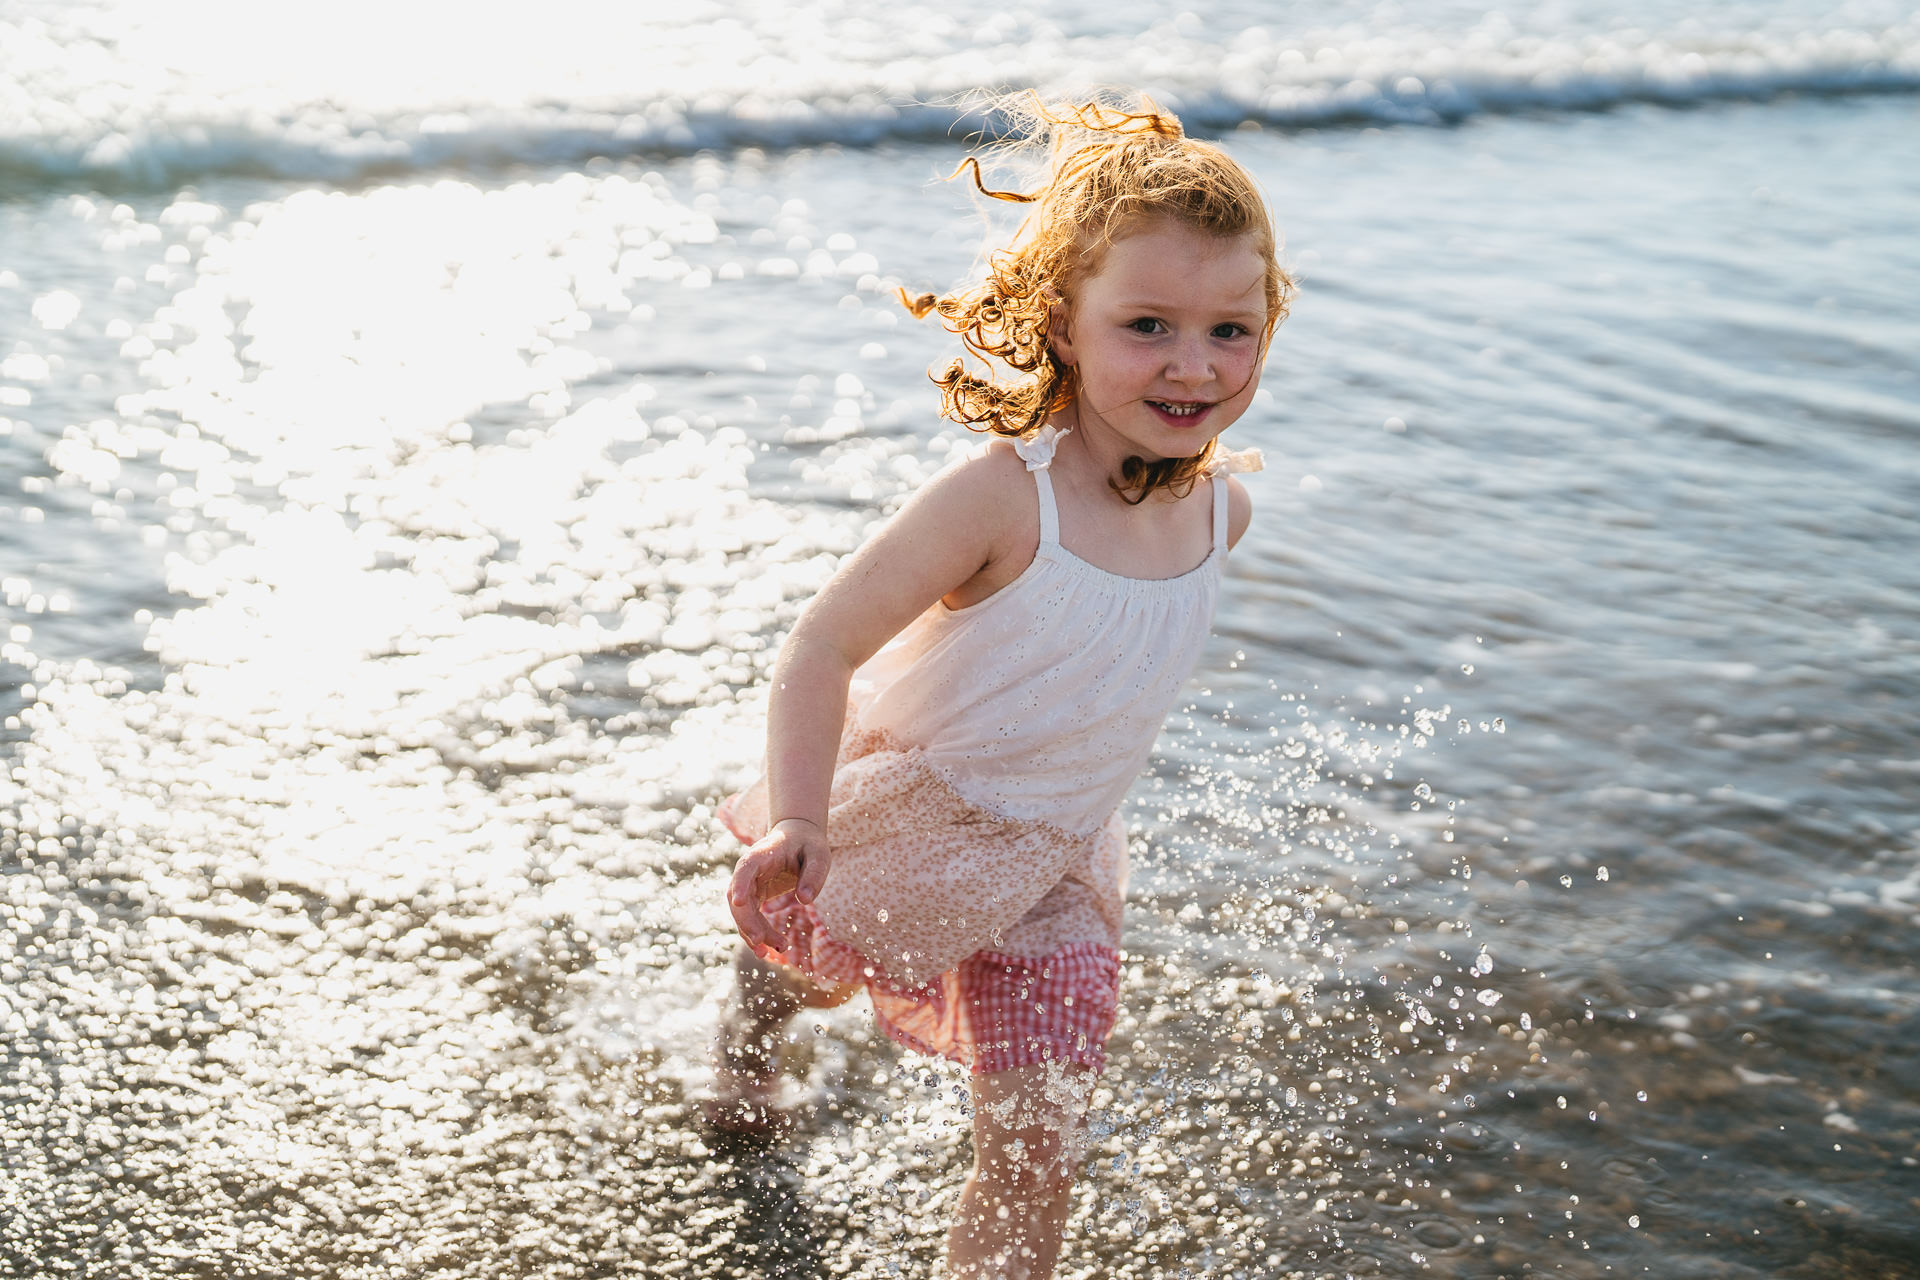 A young girl with curly hair running through the sea in North Devon